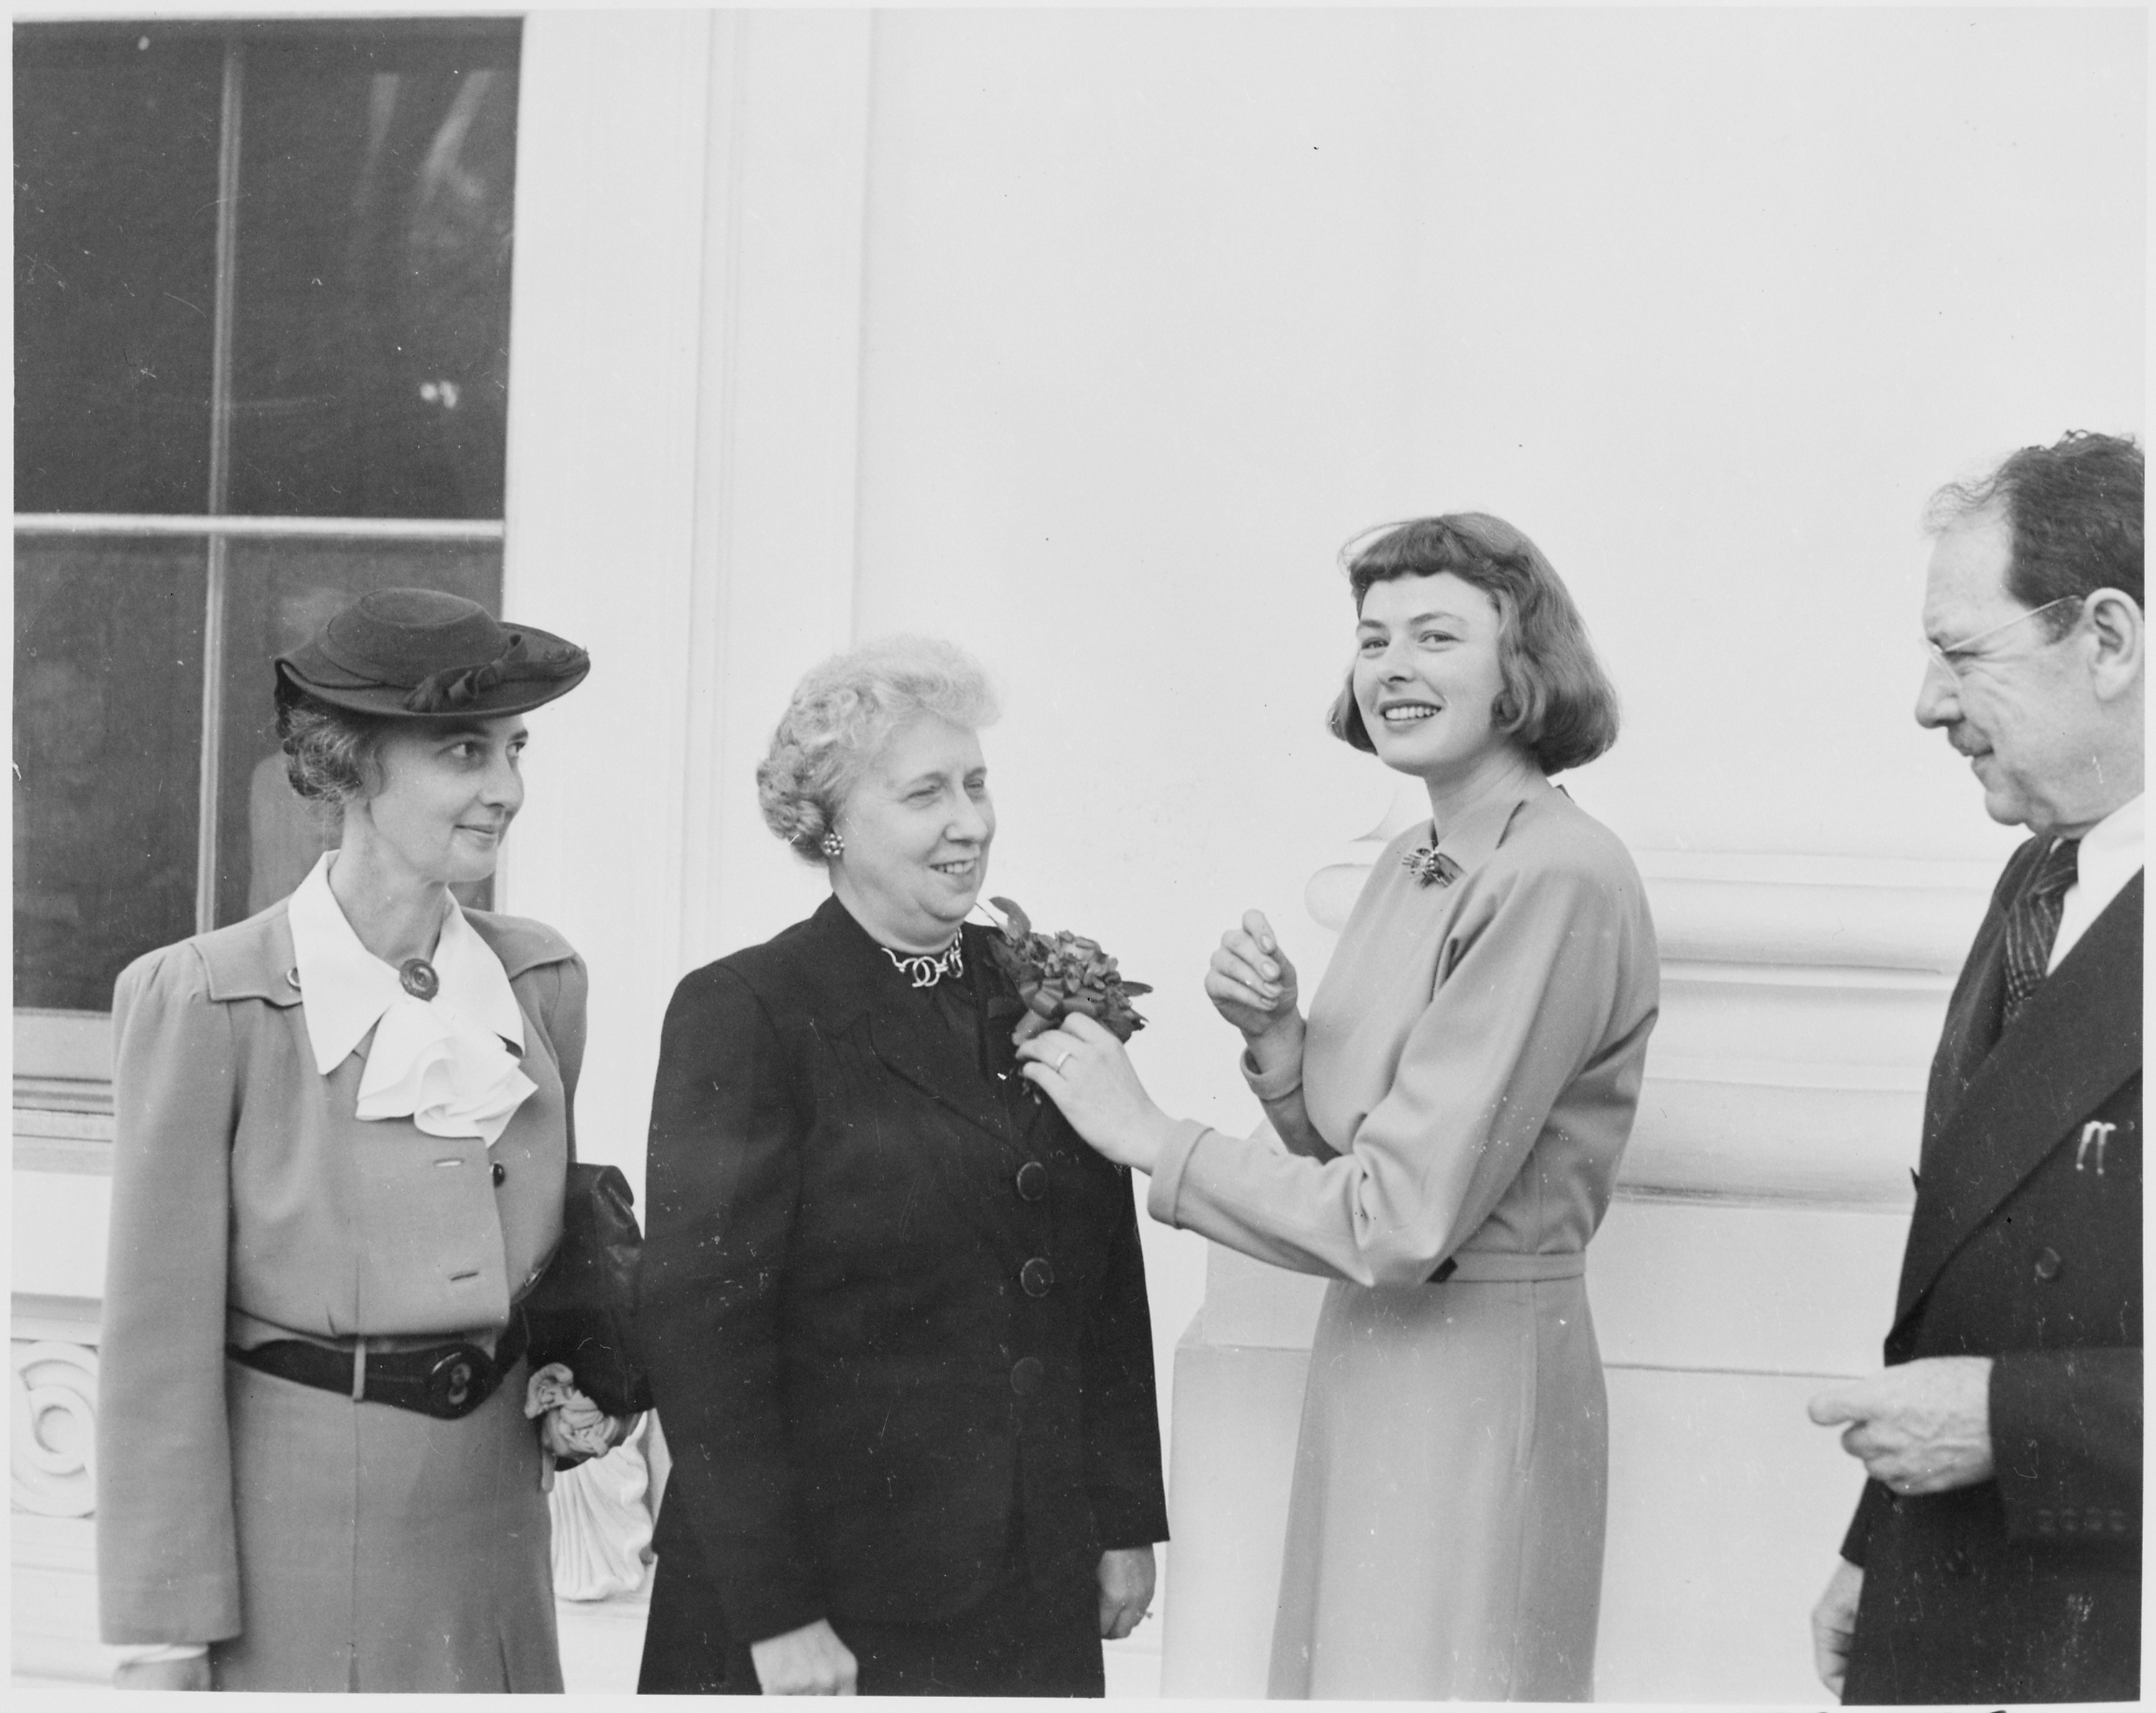 Photograph of First Lady Bess Truman receiving a community chest award and corsage from actress Ingrid Bergman, who... - NARA - 199439